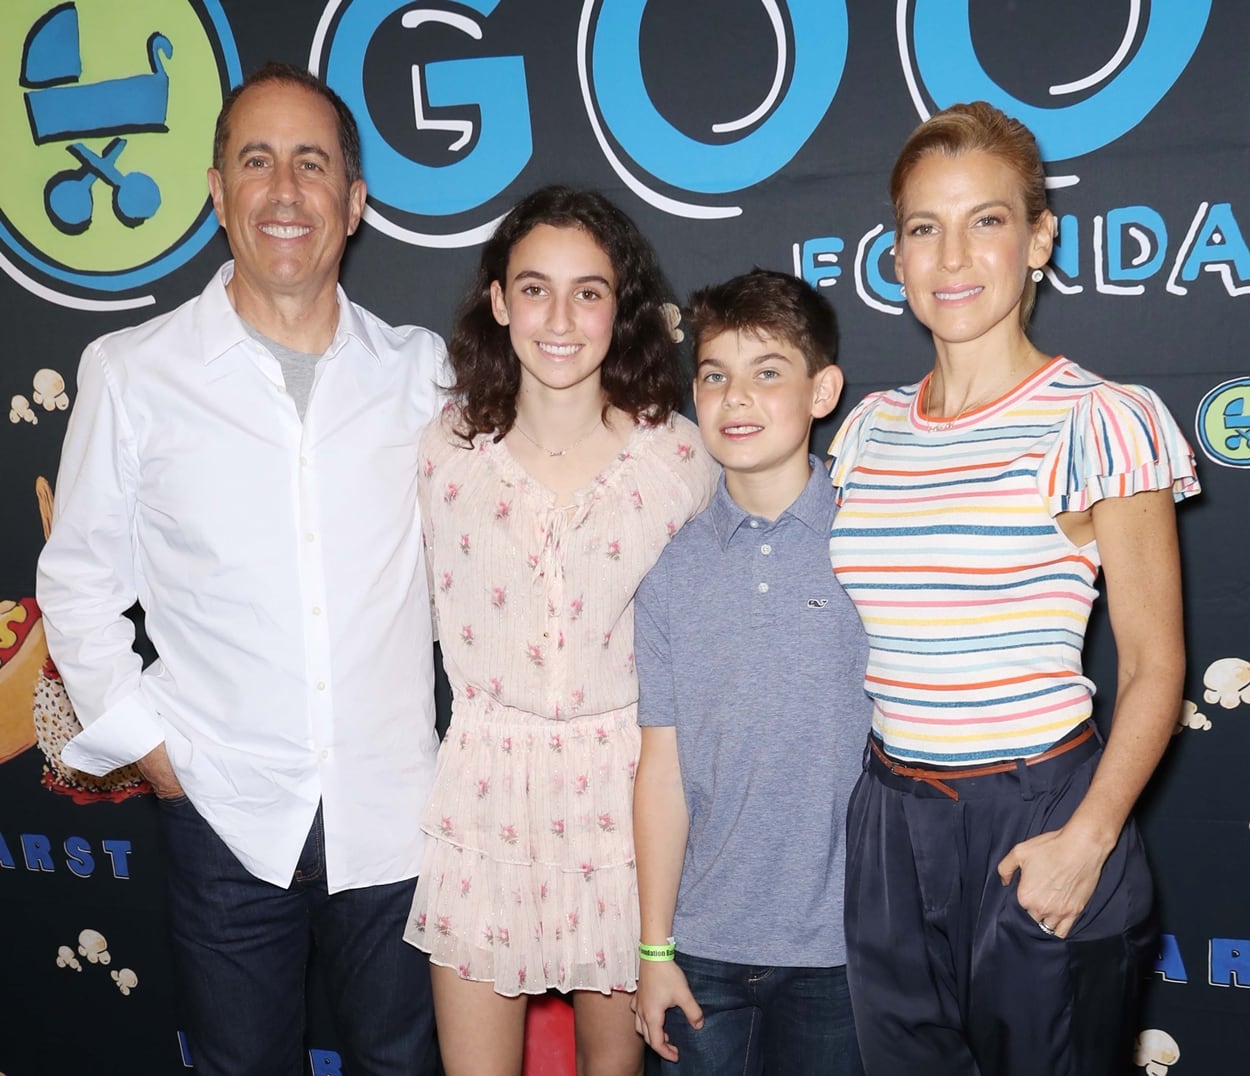 Comedian Jerry Seinfeld, founder of GOOD+ foundation Jessica Seinfeld, and their children Sascha Seinfeld and Shepherd Seinfeld attend GOOD+ Foundation's 2018 NY Bash sponsored by Hearst